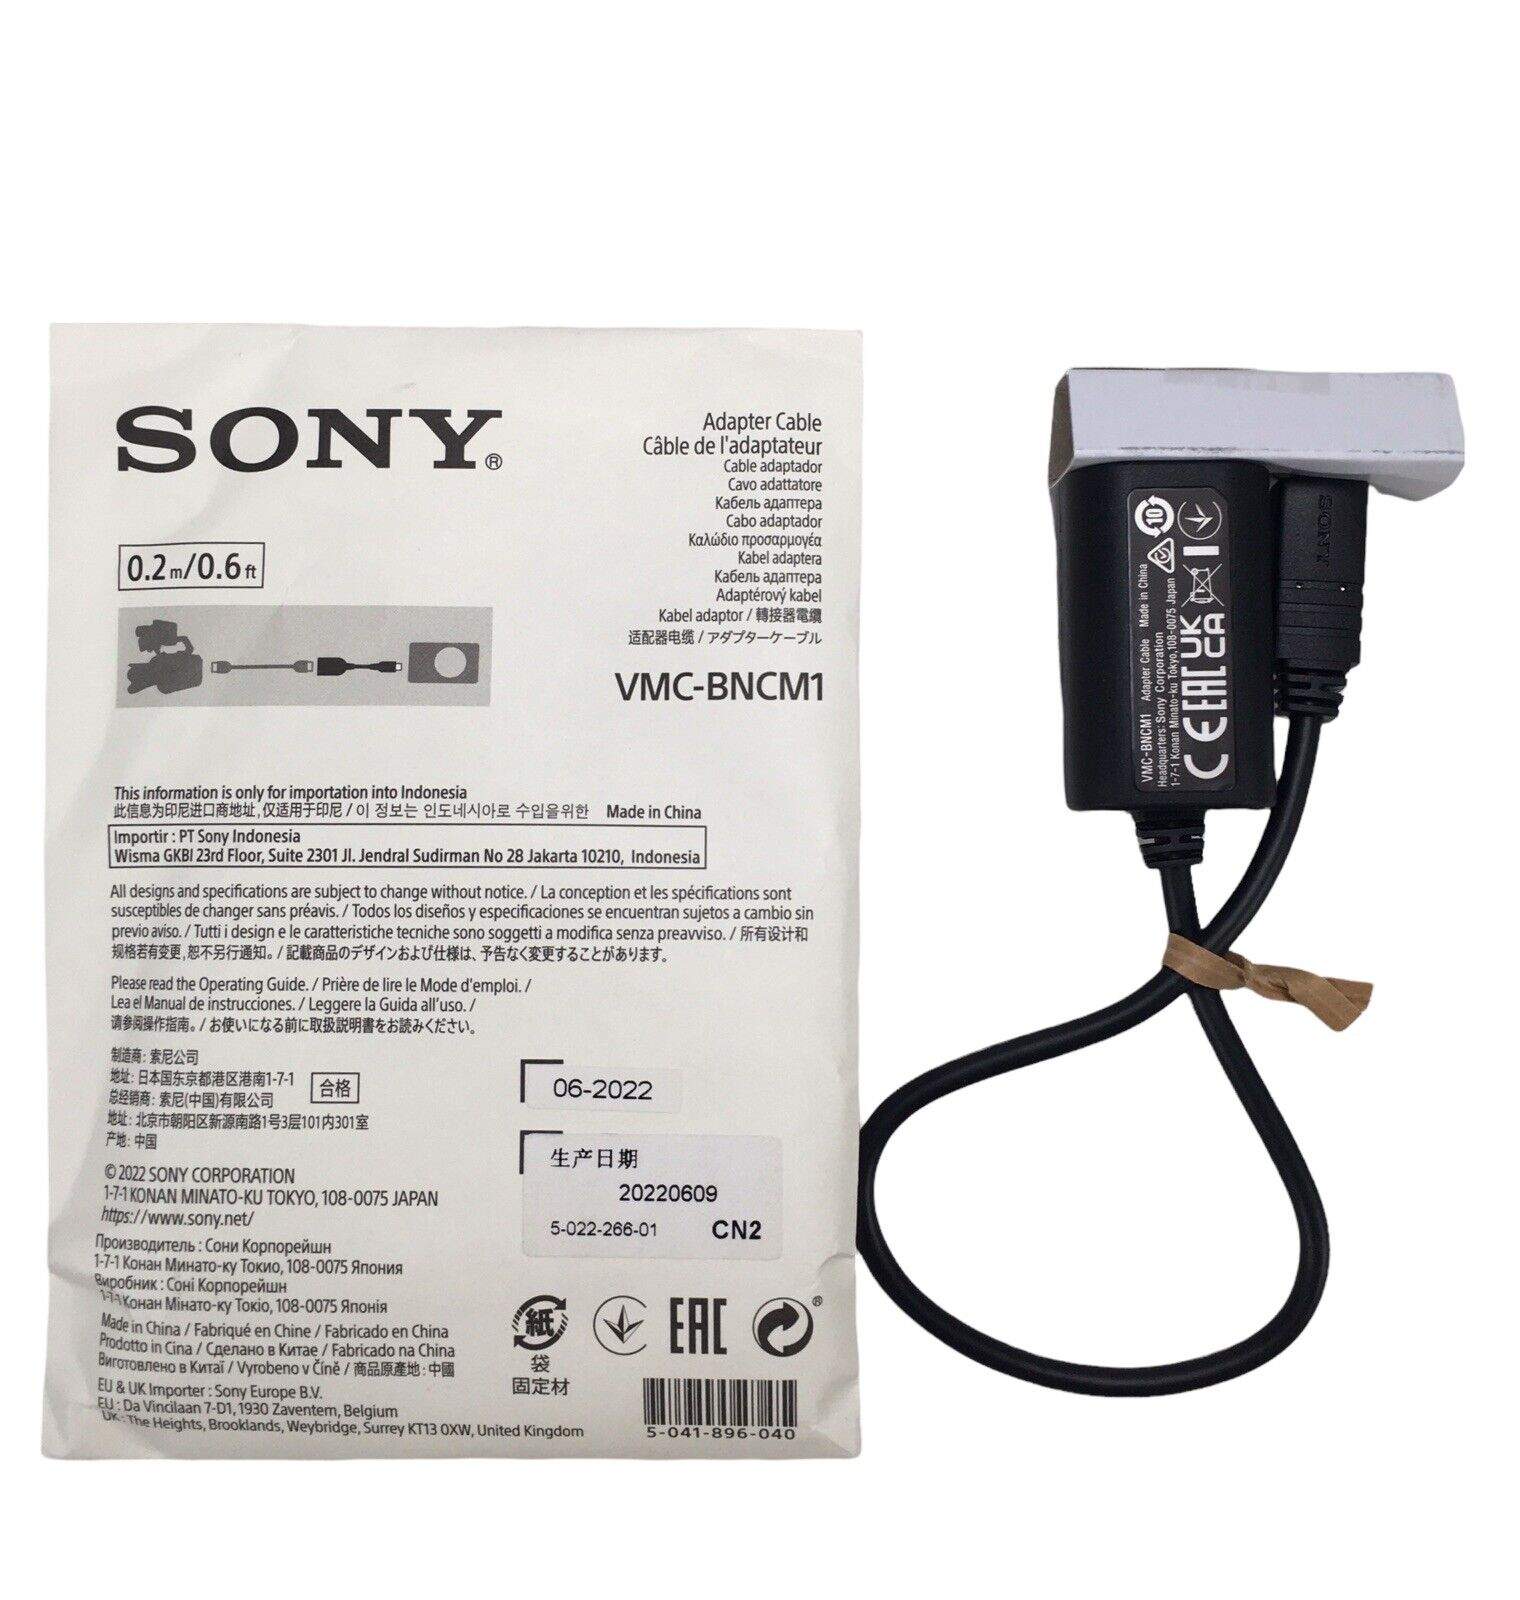 SUMMARY: Sony FX3's cable to sync to an external timecode source with this Sony VMC-BNCM1 Timecode Adapter Cable. The cable features a Multi-Terminal connection for the camera and a BNC female for external devices. Genuine Sony.